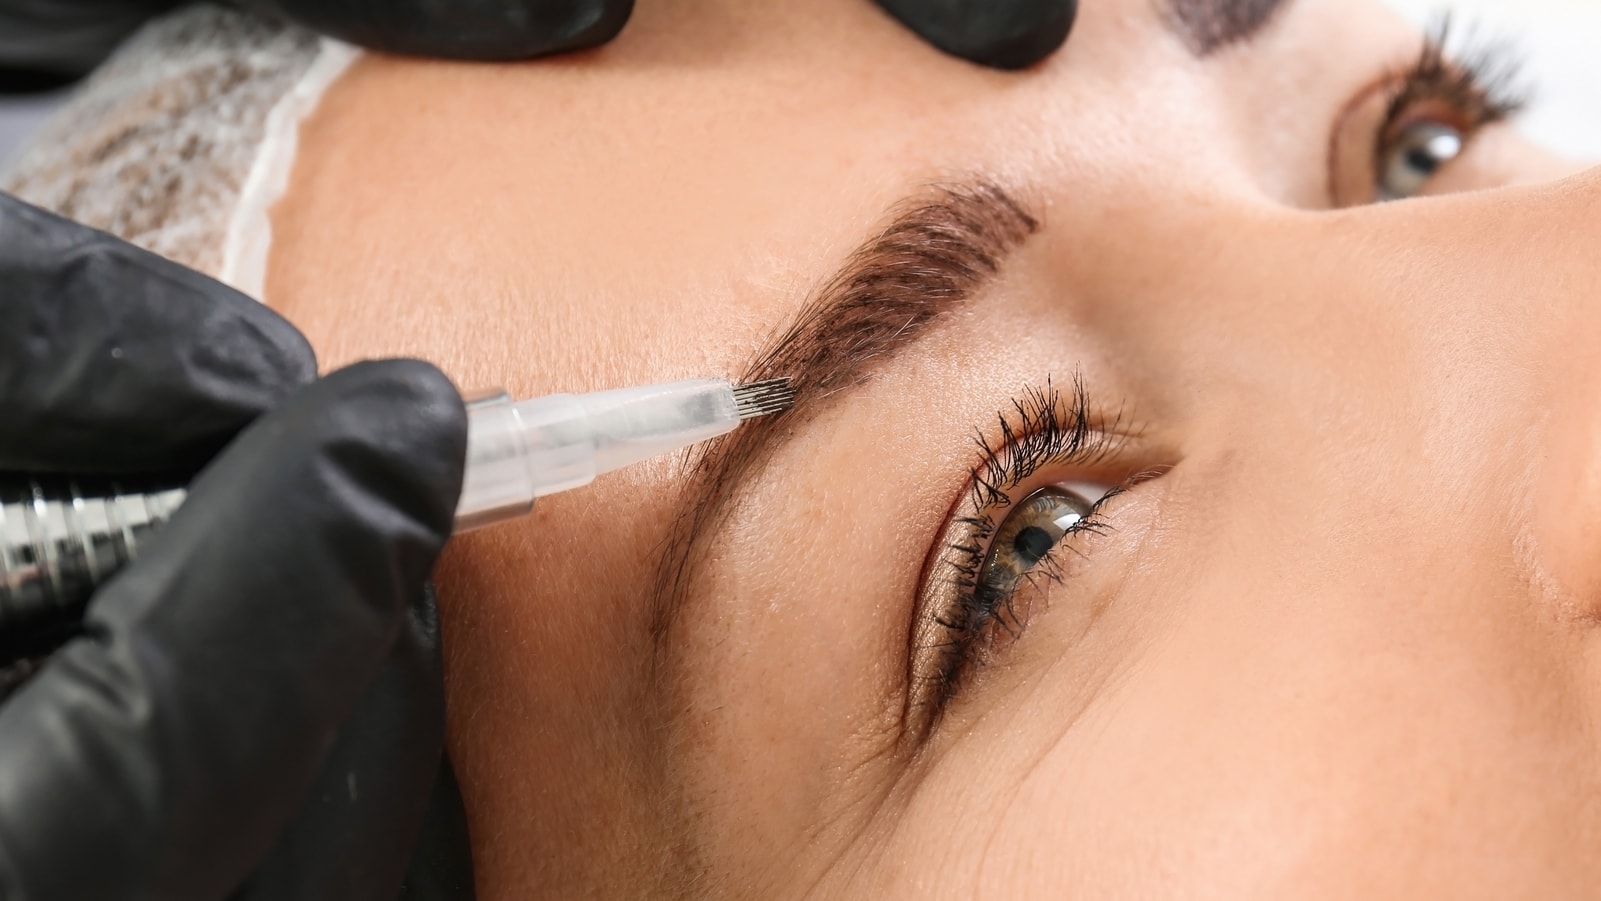 Medical Permanent Makeup and Microblading